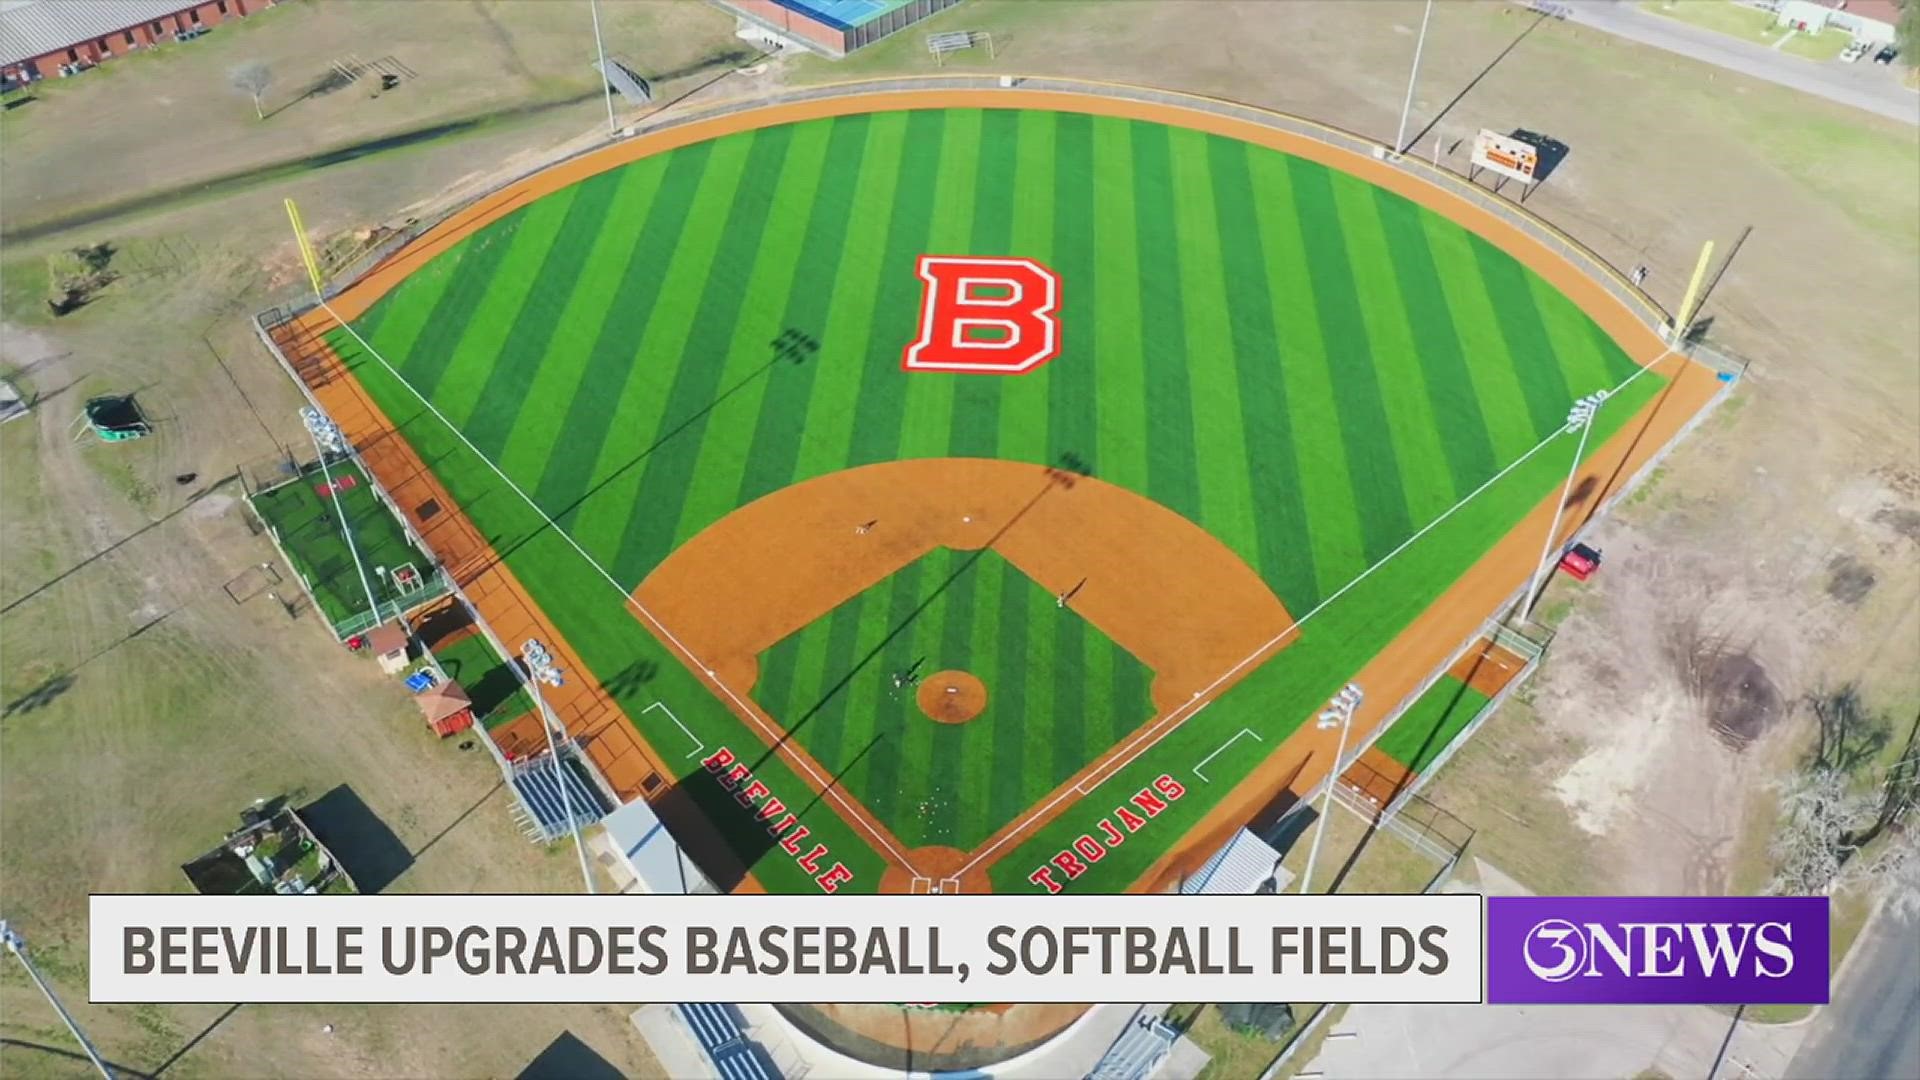 The Beeville Jones Trojans are enjoying new turf fields this season. Video and interview courtesy Hellas Construction.